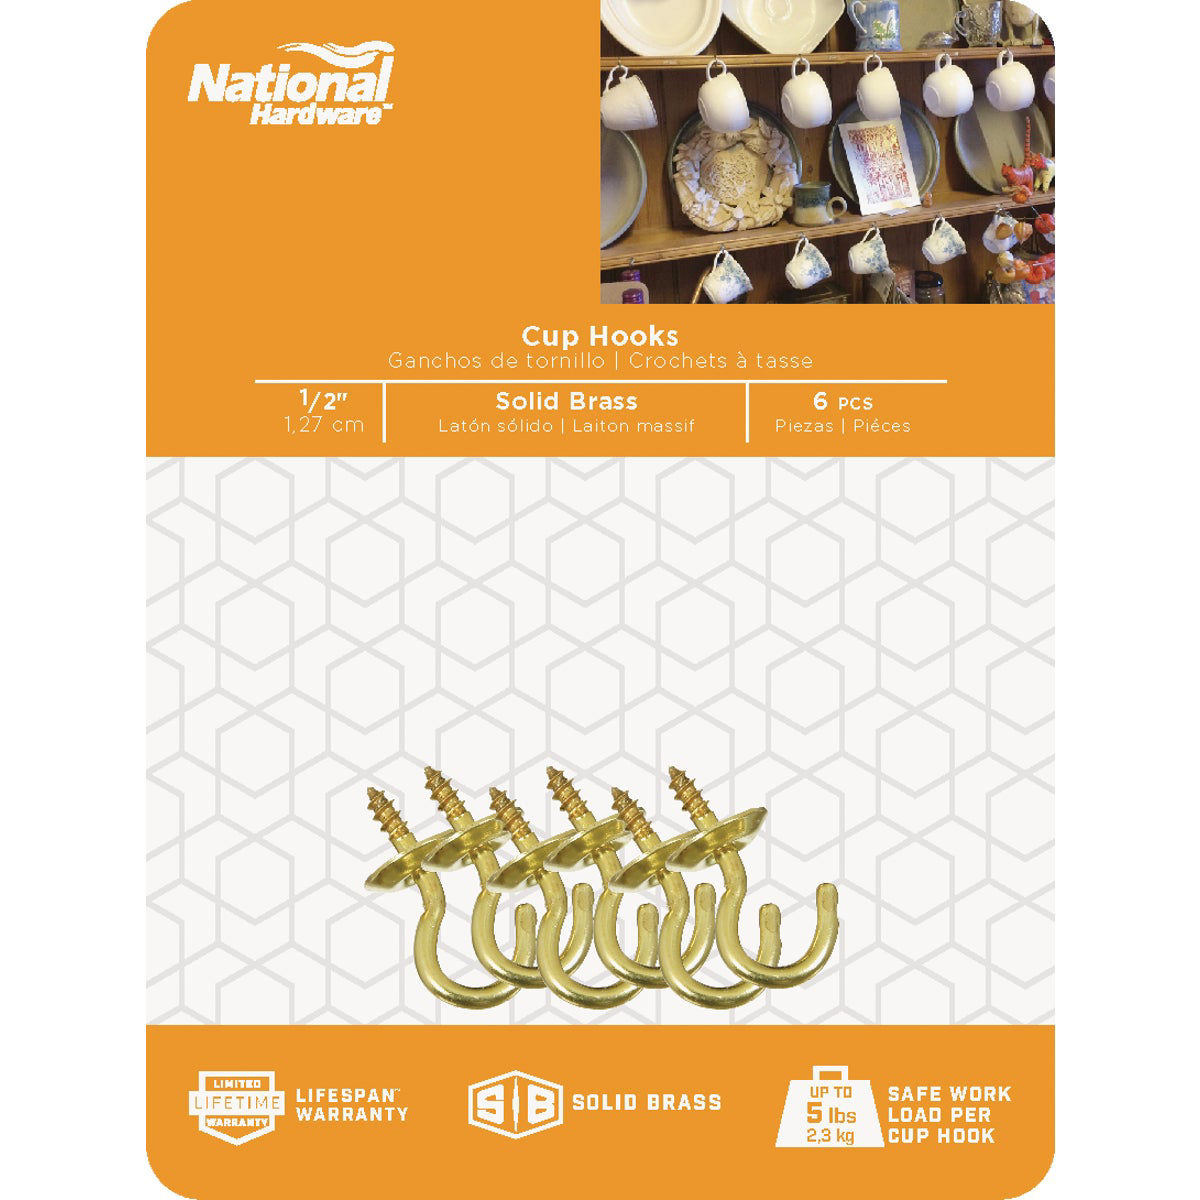 National V2021 1/2 In. Solid Brass Series Cup Hook (6 Count